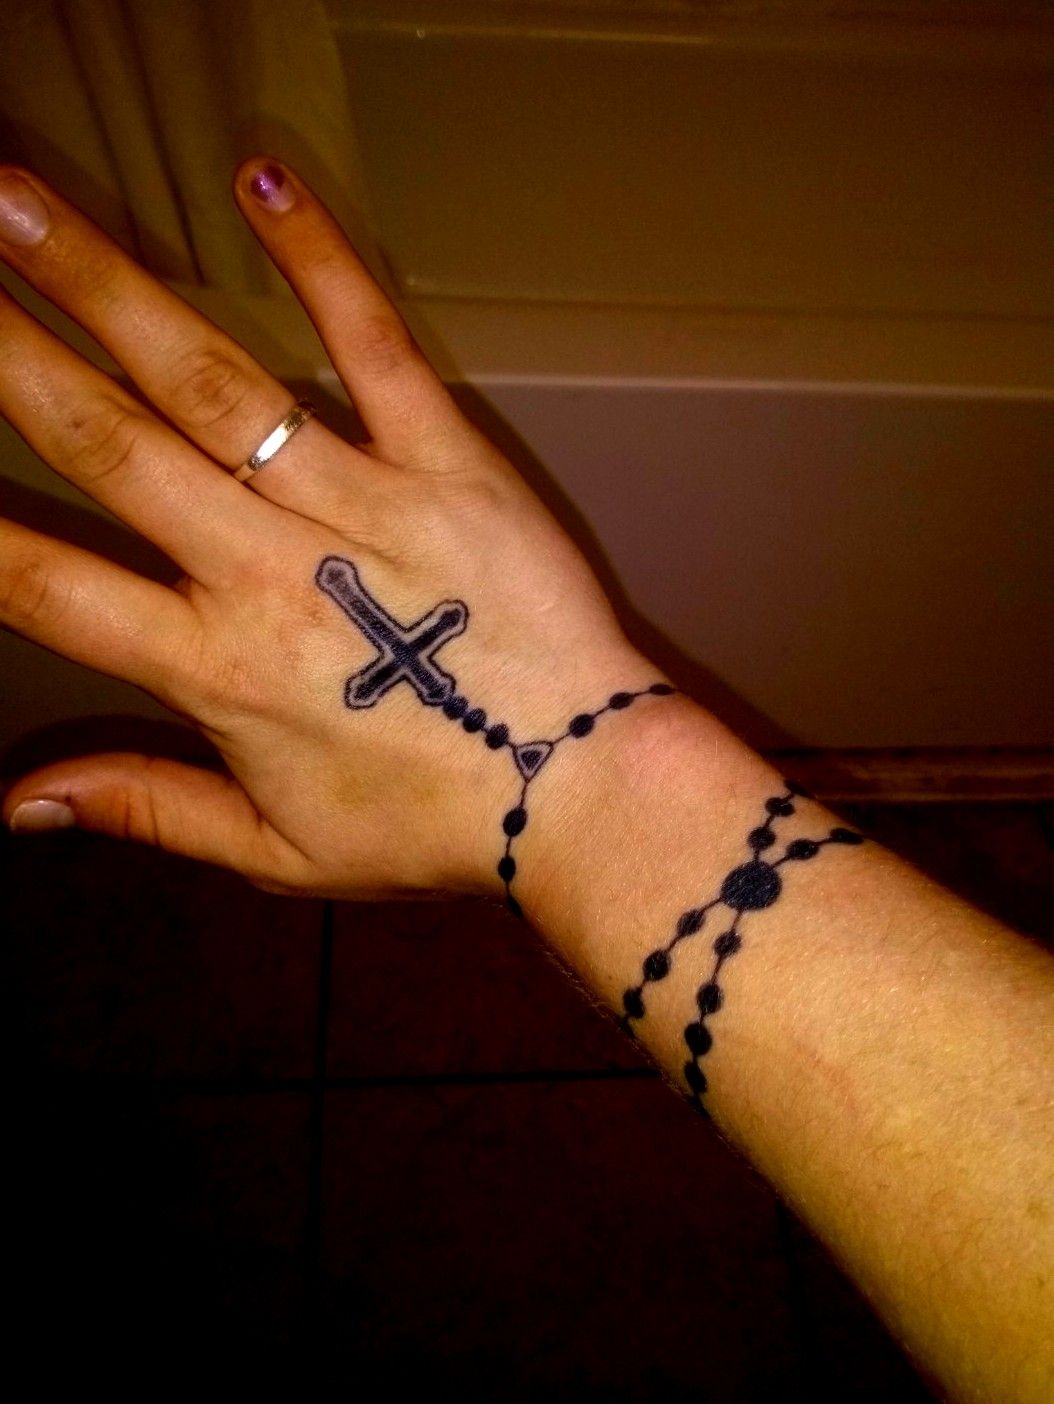 Had a blast with these rosary beads and crucifix tattooed tattooparlor  tattoolover tattoolife inked   Wrist tattoos for women Rosary tattoo  Finger tattoos